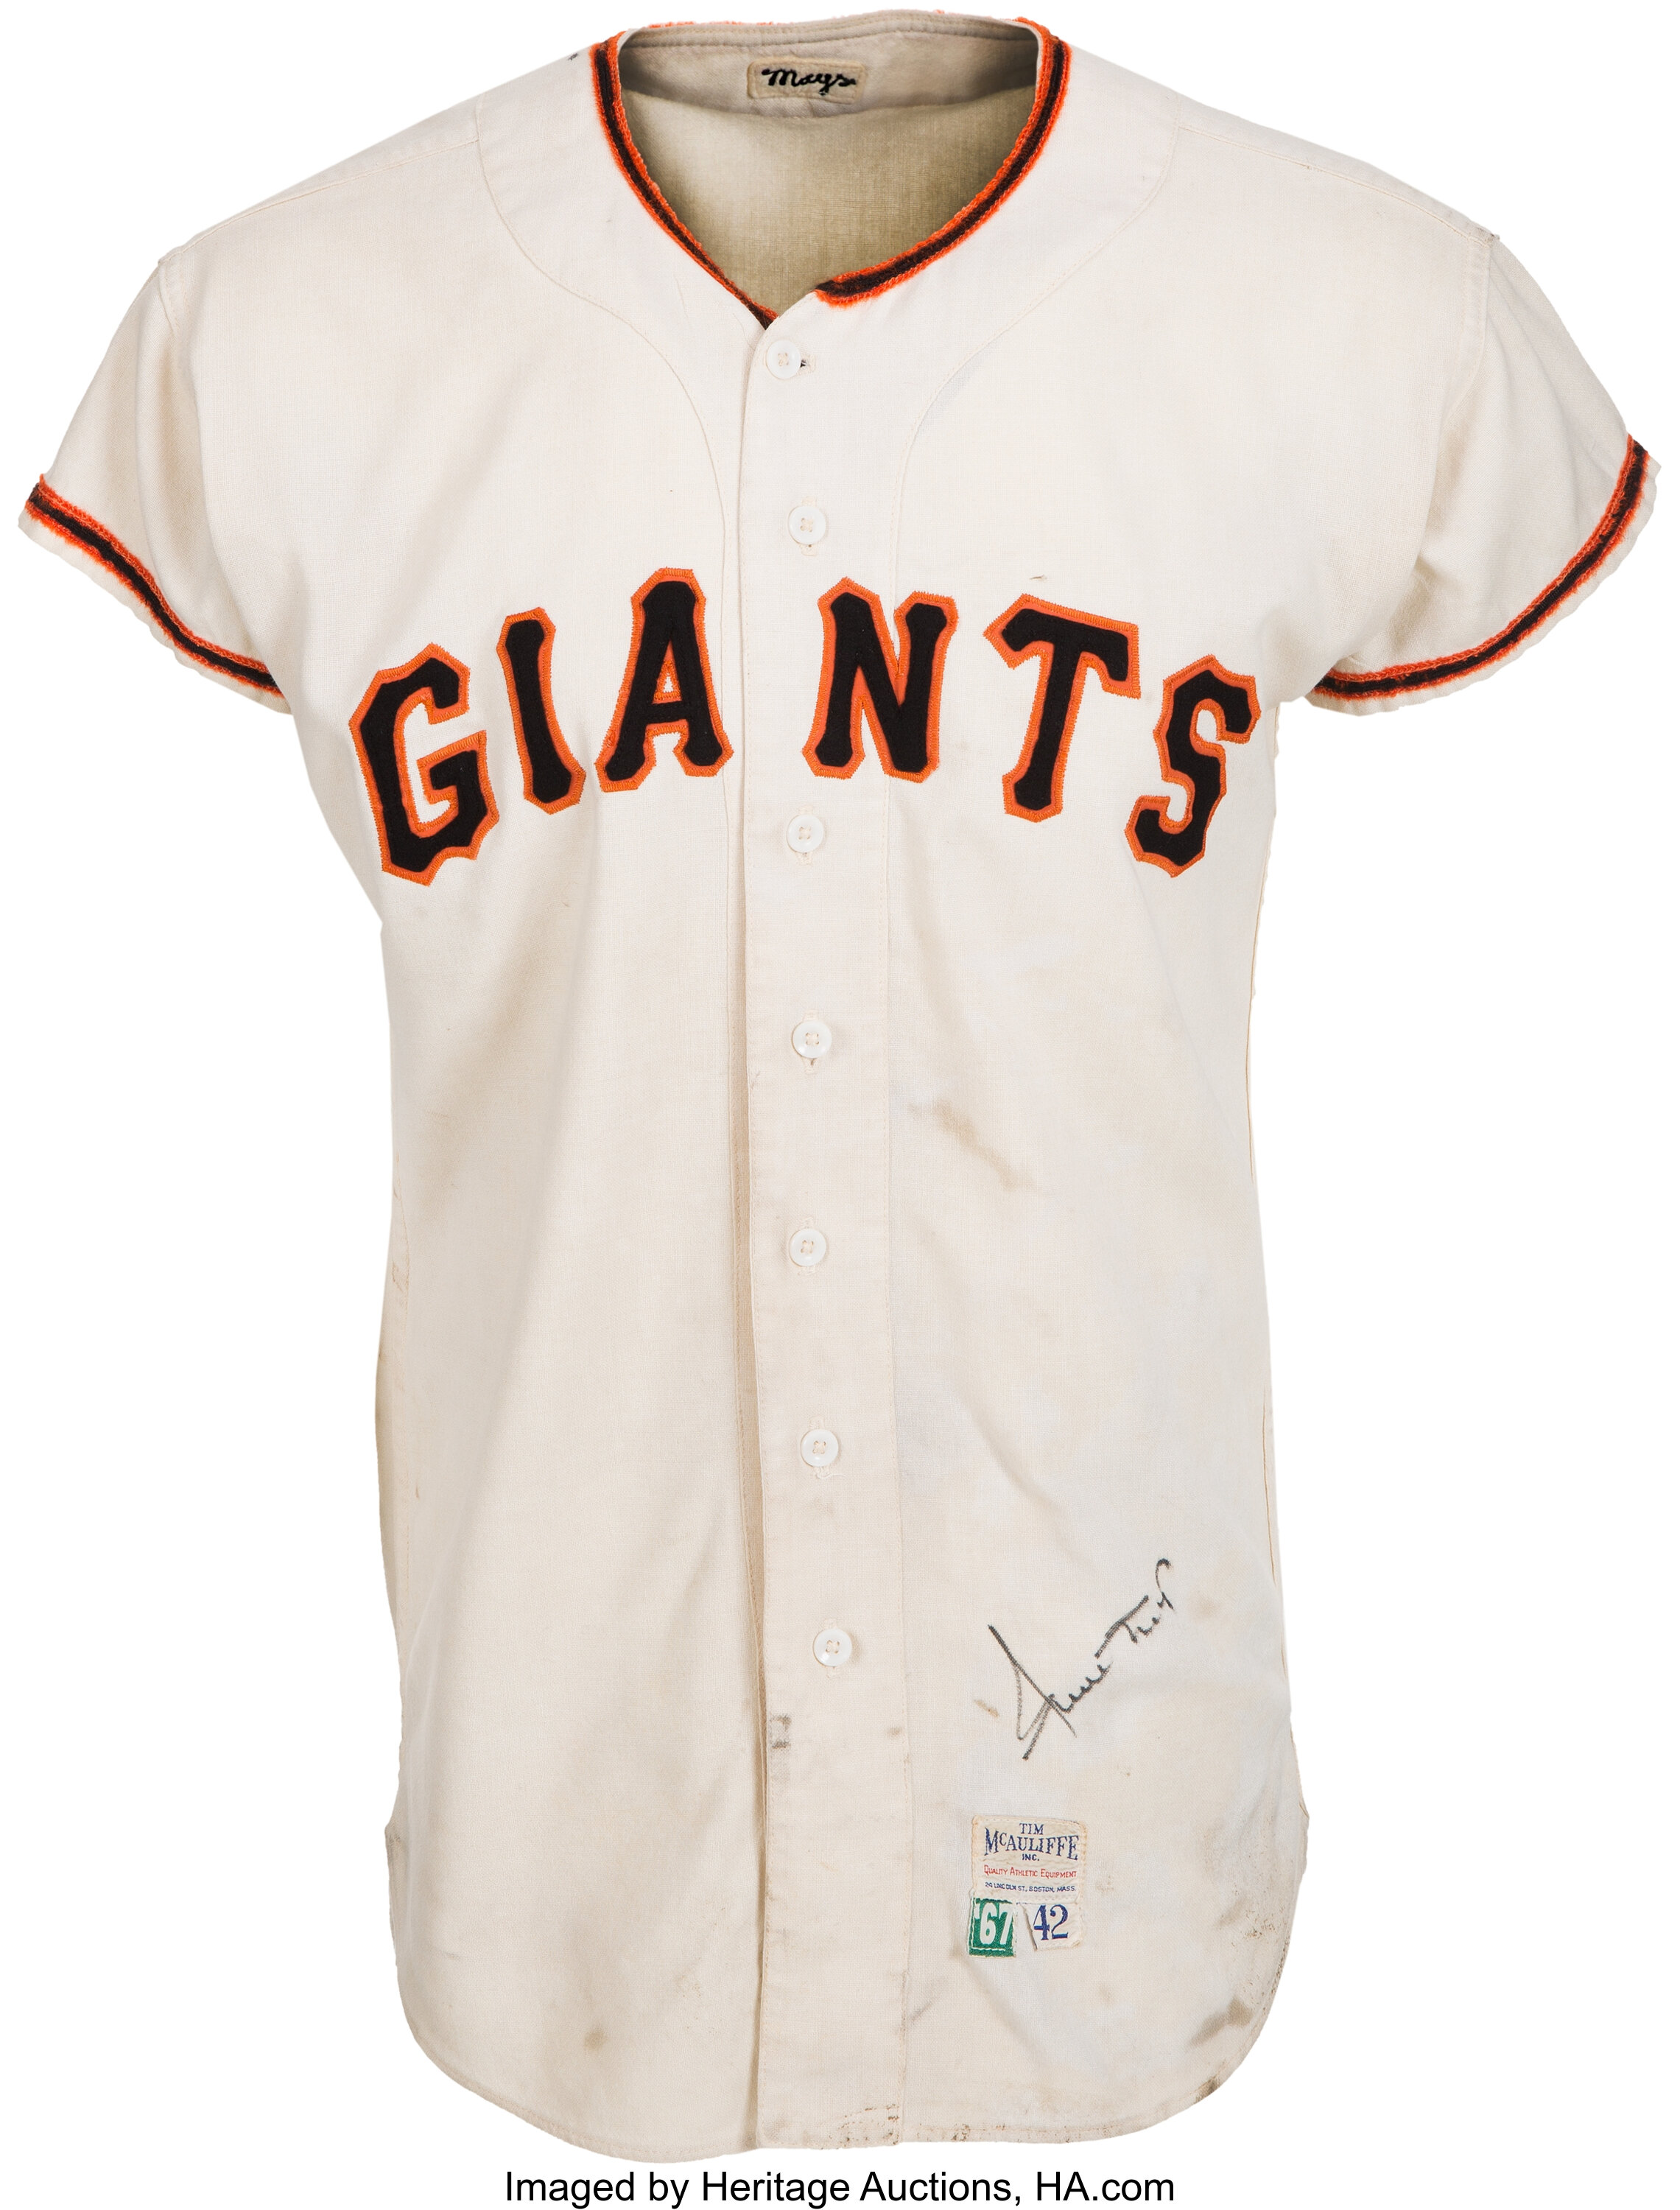 1973 Willie Mays Game Worn New York Mets Jersey, MEARS A10